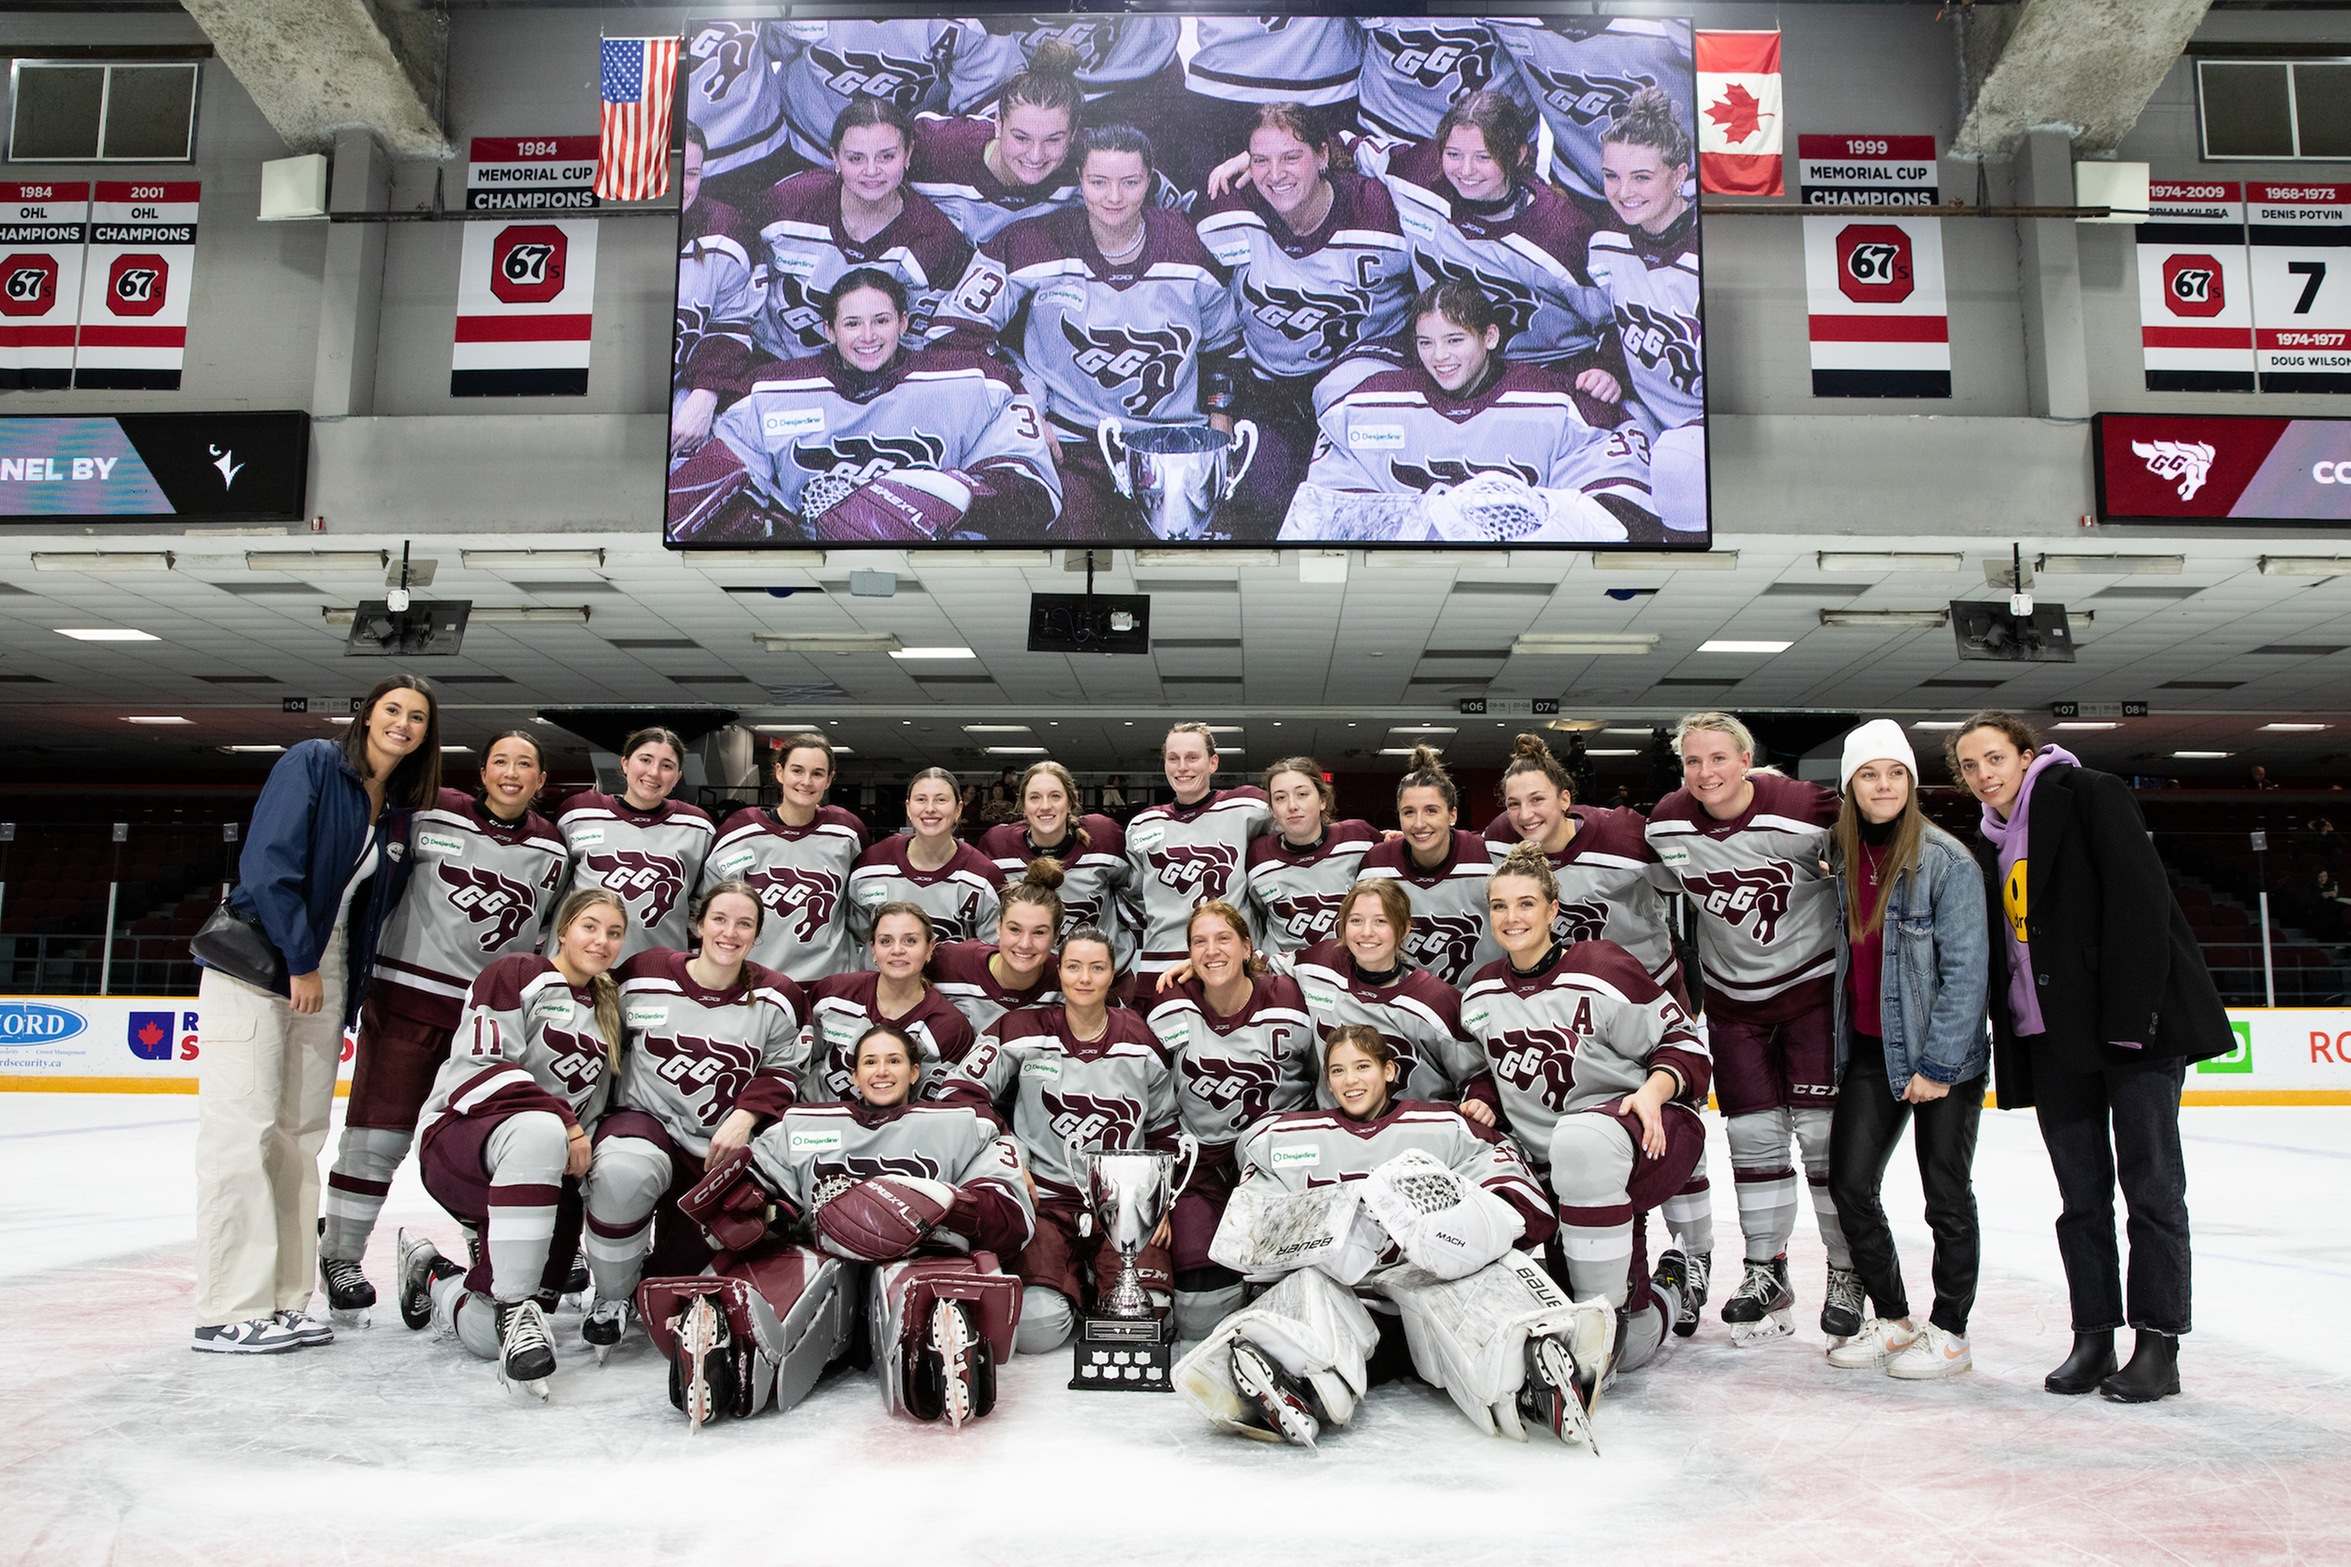 The Gee-Gees women's hockey team gathers around the Alerts Cup trophy on the ice at TD Place with the stadium TV screen behind them.